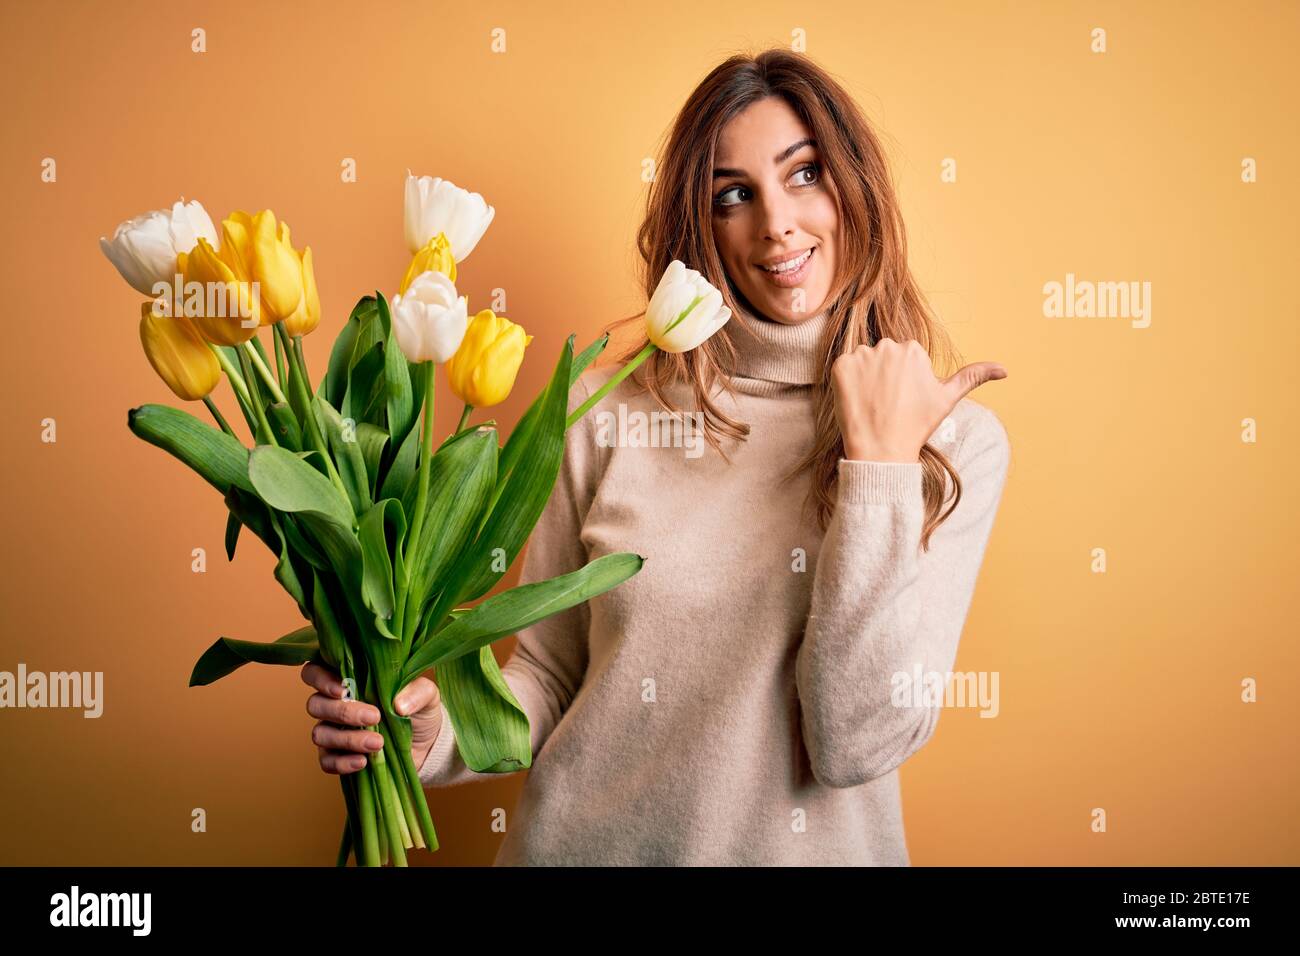 Young beautiful brunette woman holding bouquet of yellow tulips over isolated background smiling with happy face looking and pointing to the side with Stock Photo